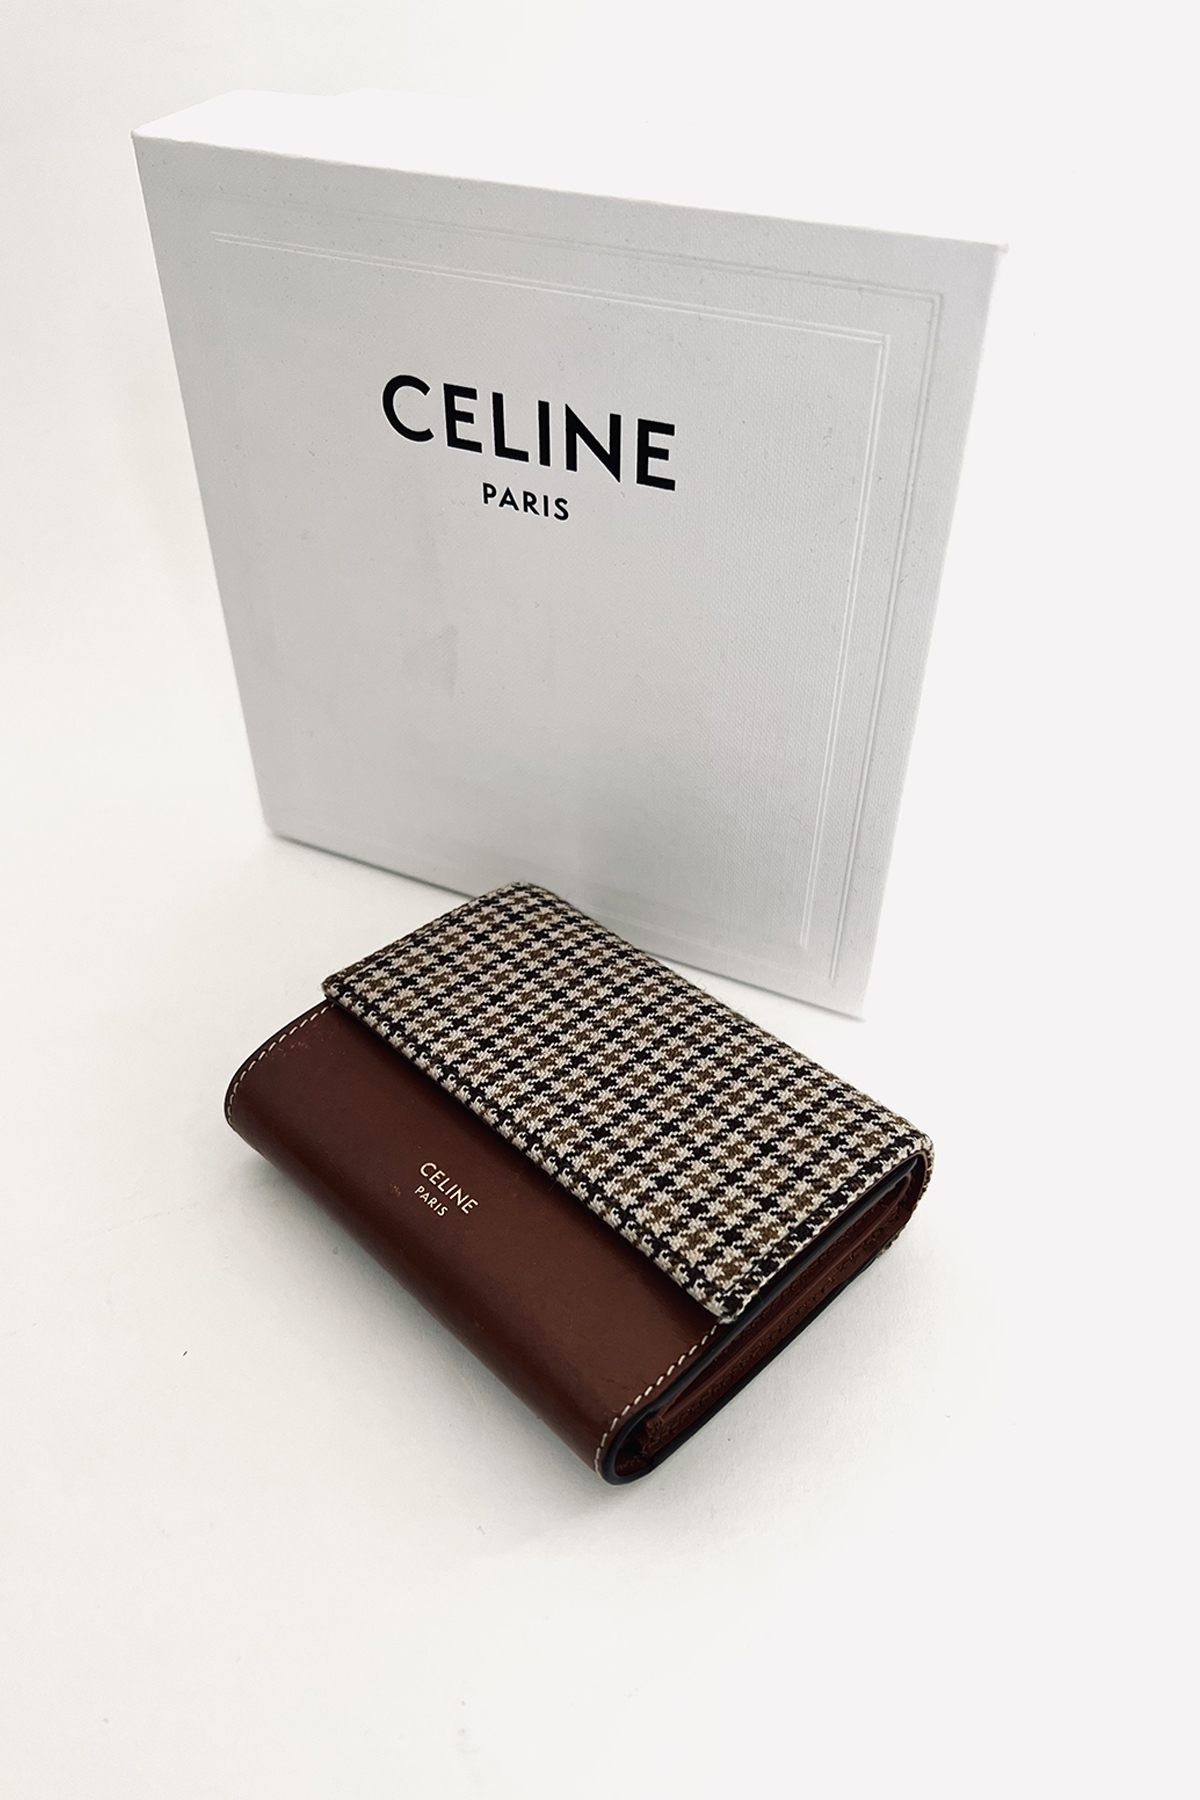 Celine Wallet With Box